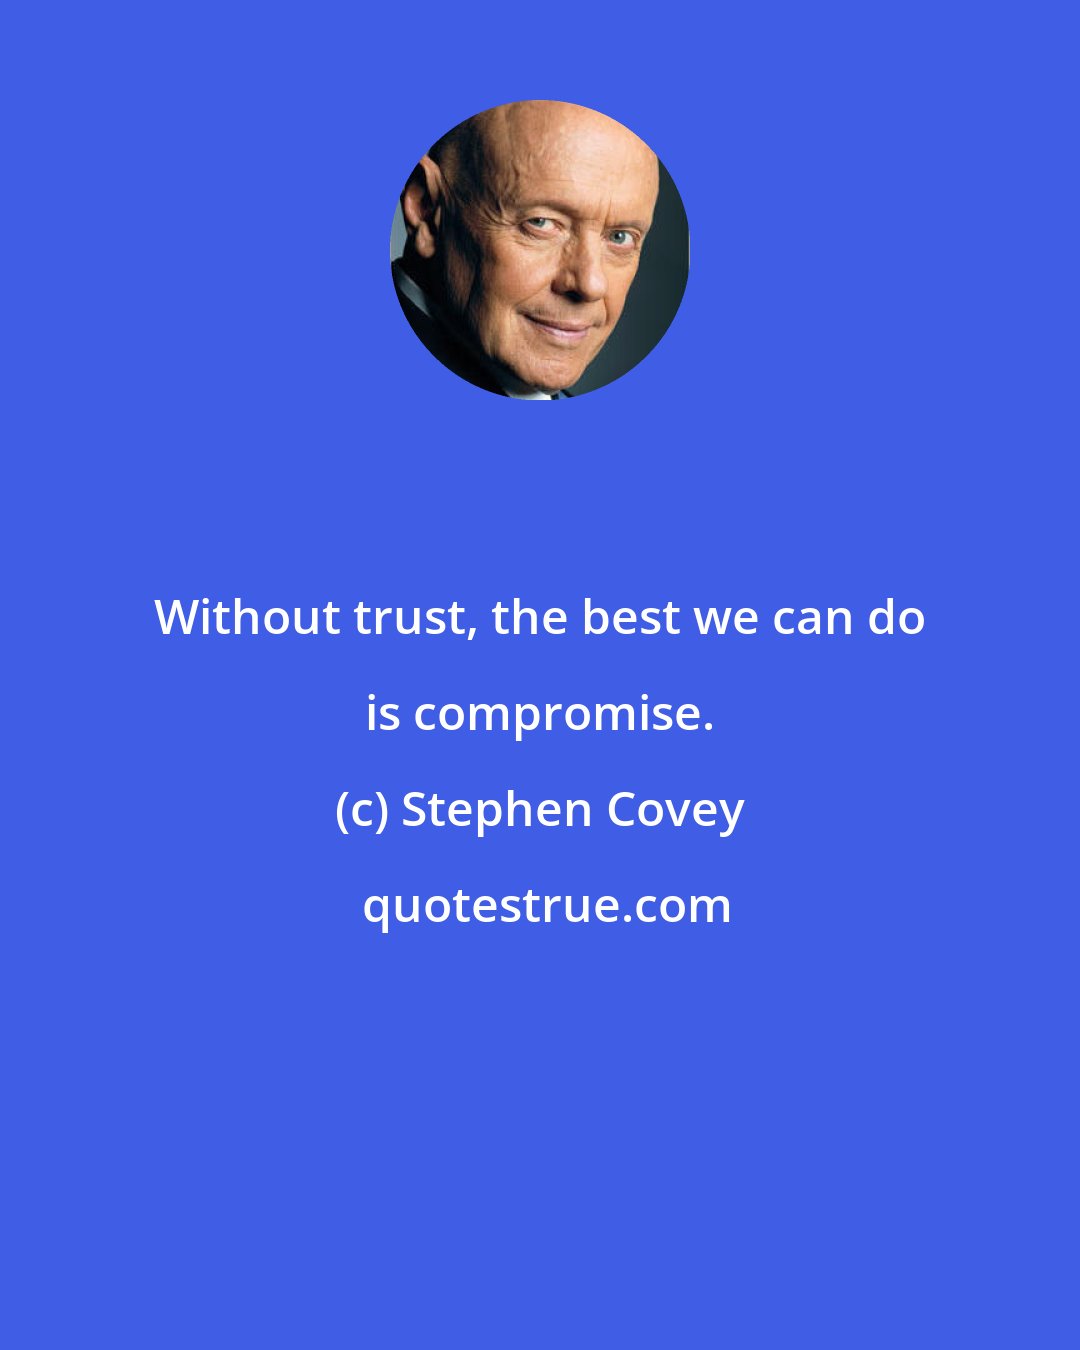 Stephen Covey: Without trust, the best we can do is compromise.